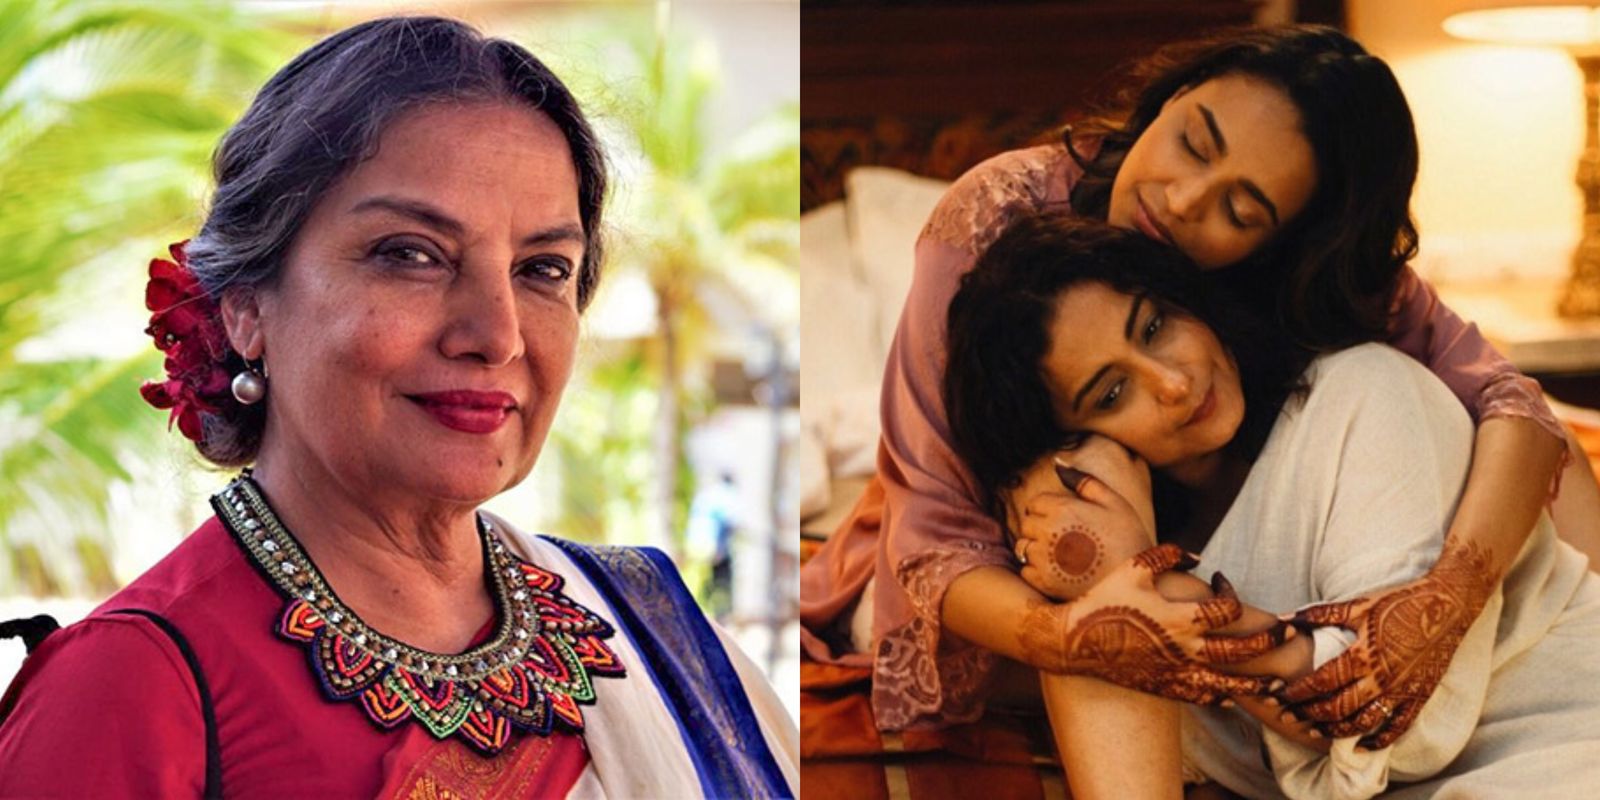 Shabana Azmi Shares How Her Next Film Sheer Qorma Is A Logical Move Forward After Fire